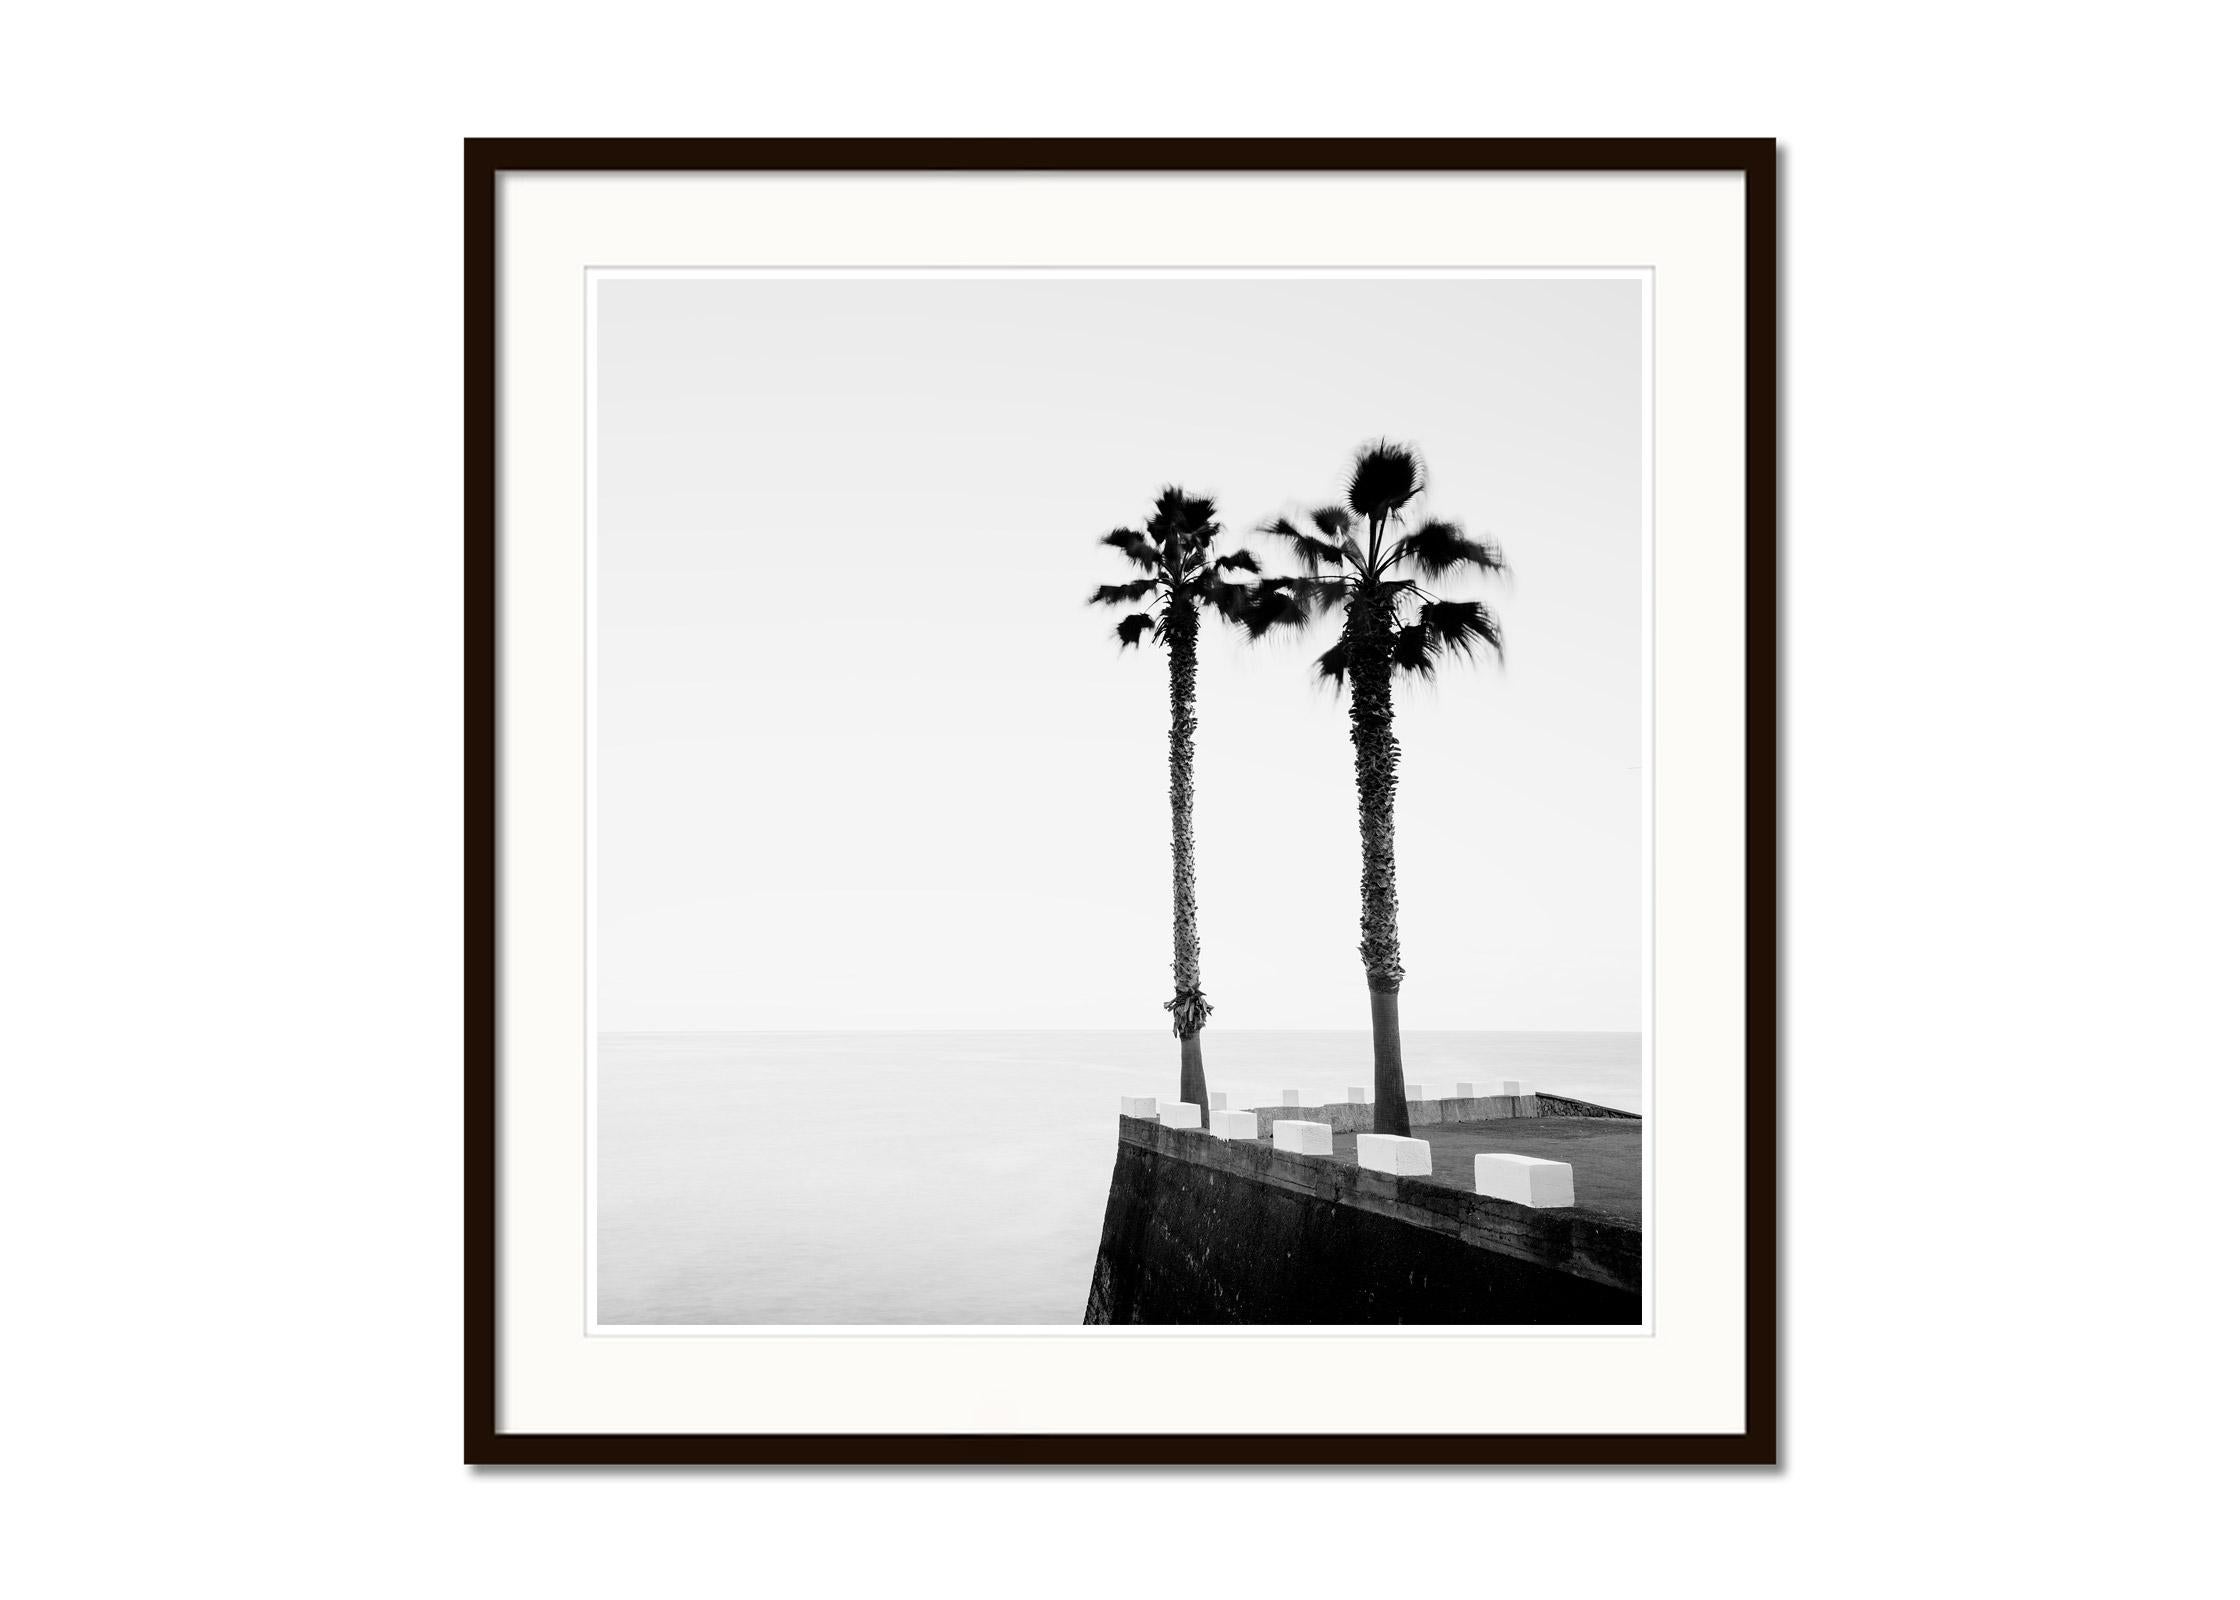 Parking lot with Palm Trees, Madeira, black and white photography, art landscape - Contemporary Photograph by Gerald Berghammer